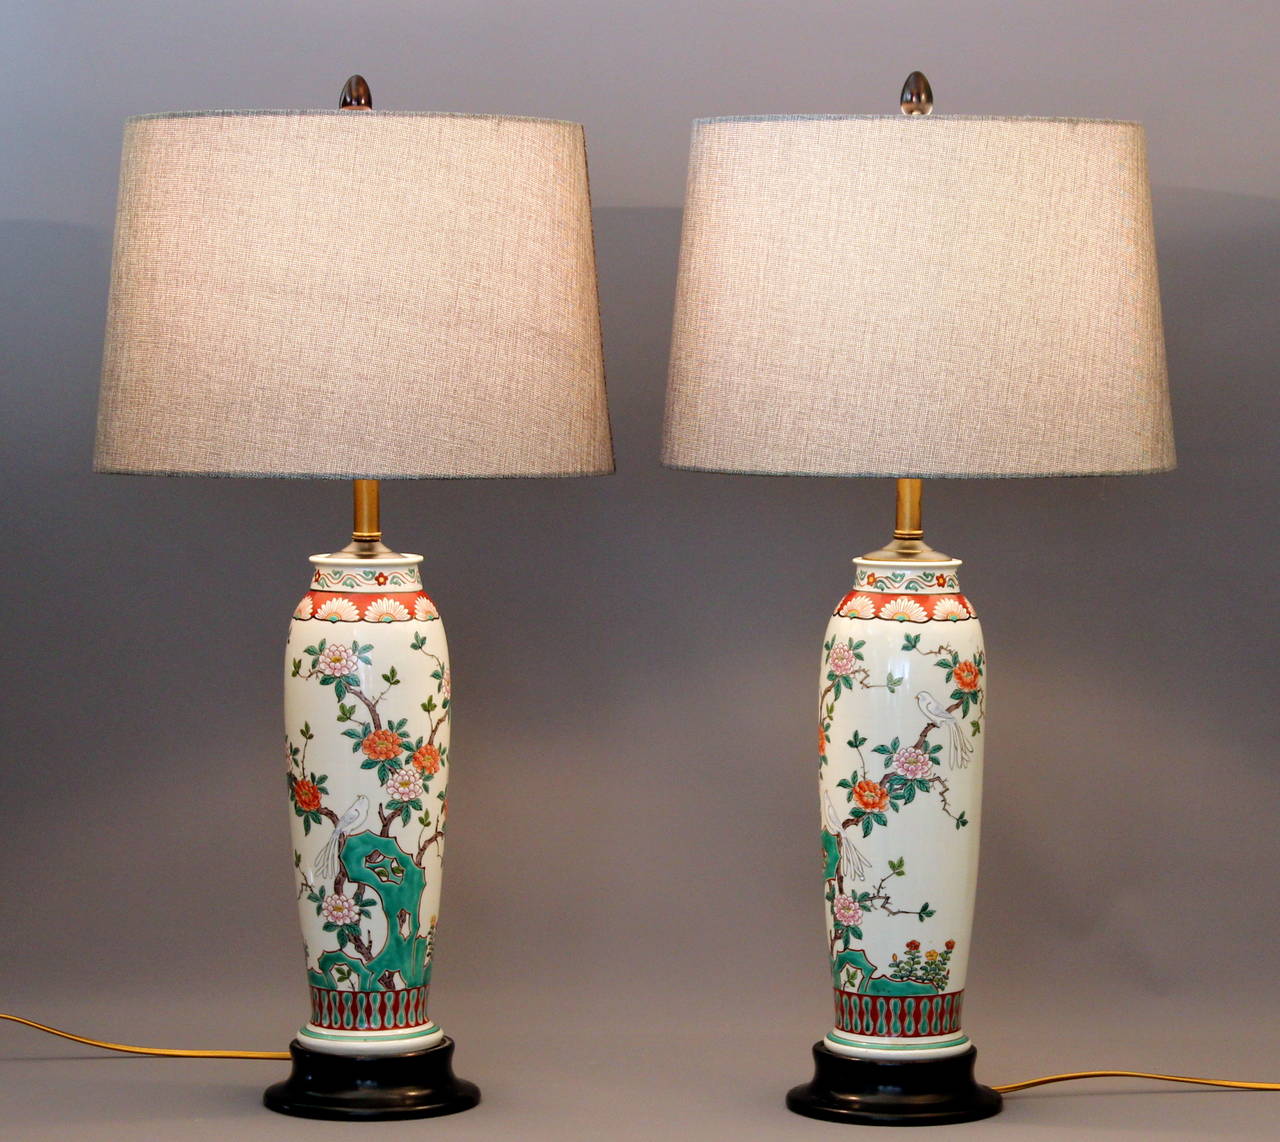 Good quality Japanese hand turned and enamelled porcelain lamps, circa 1930's. 30